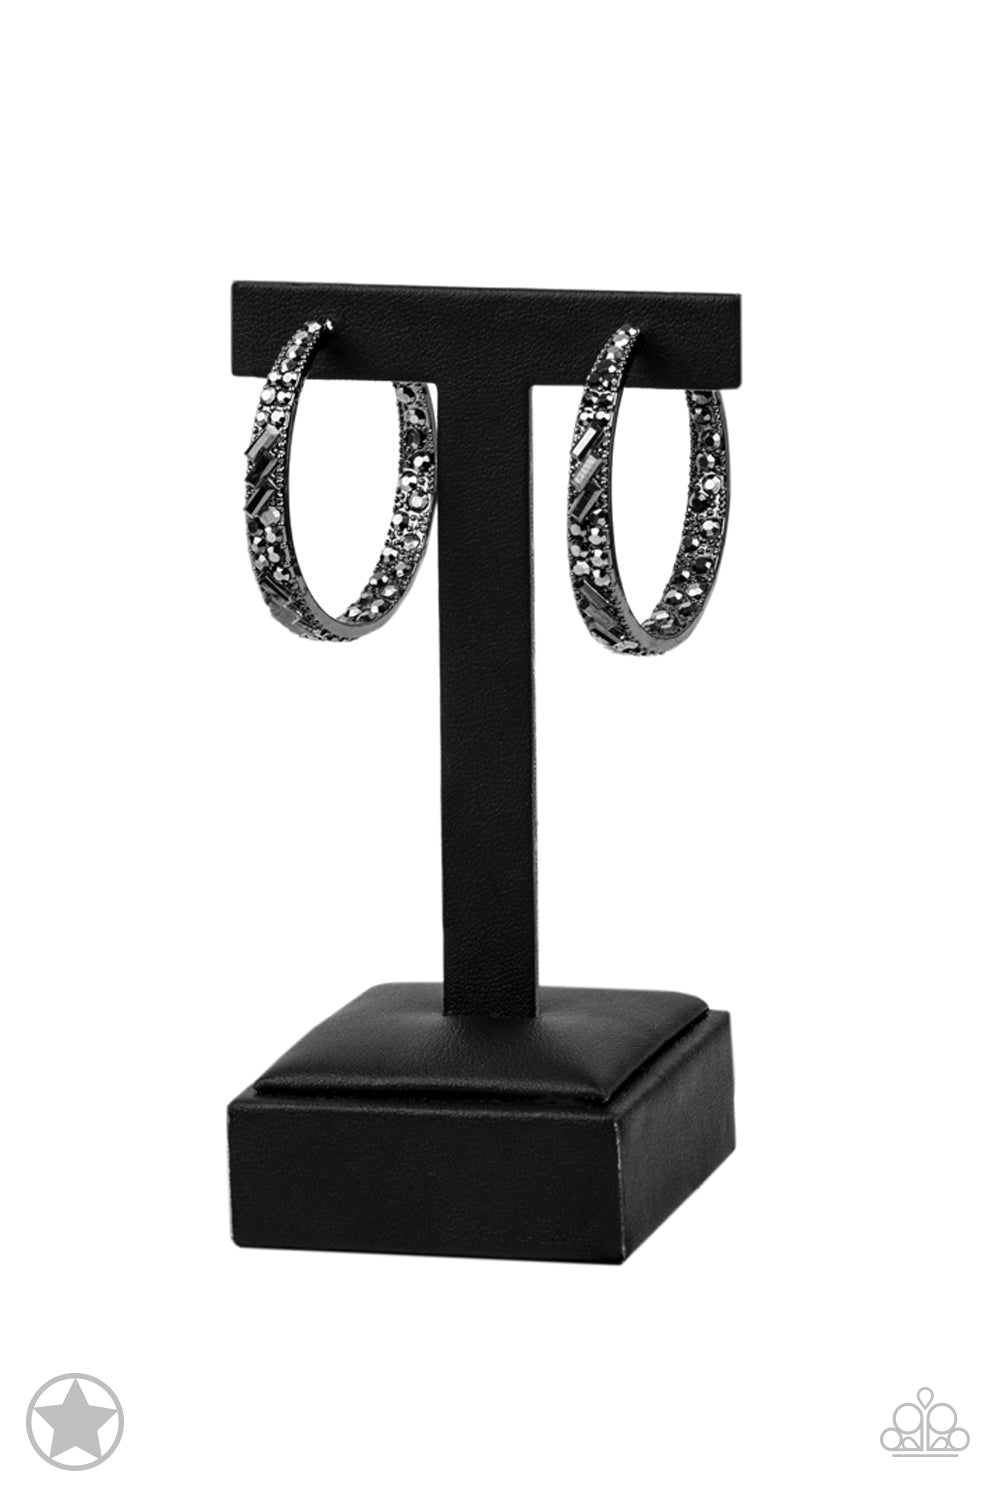 The front facing surface of a chunky gunmetal hoop is dipped in brilliantly sparkling hematite rhinestones while light-catching texture wraps around the back. The interior of the hoop features the opposite pattern, creating the illusion of a full hoop of blinding shimmer. Earring attaches to a standard post fitting. Hoop measures 1 3/4" in diameter.  Sold as one pair of hoop earrings.